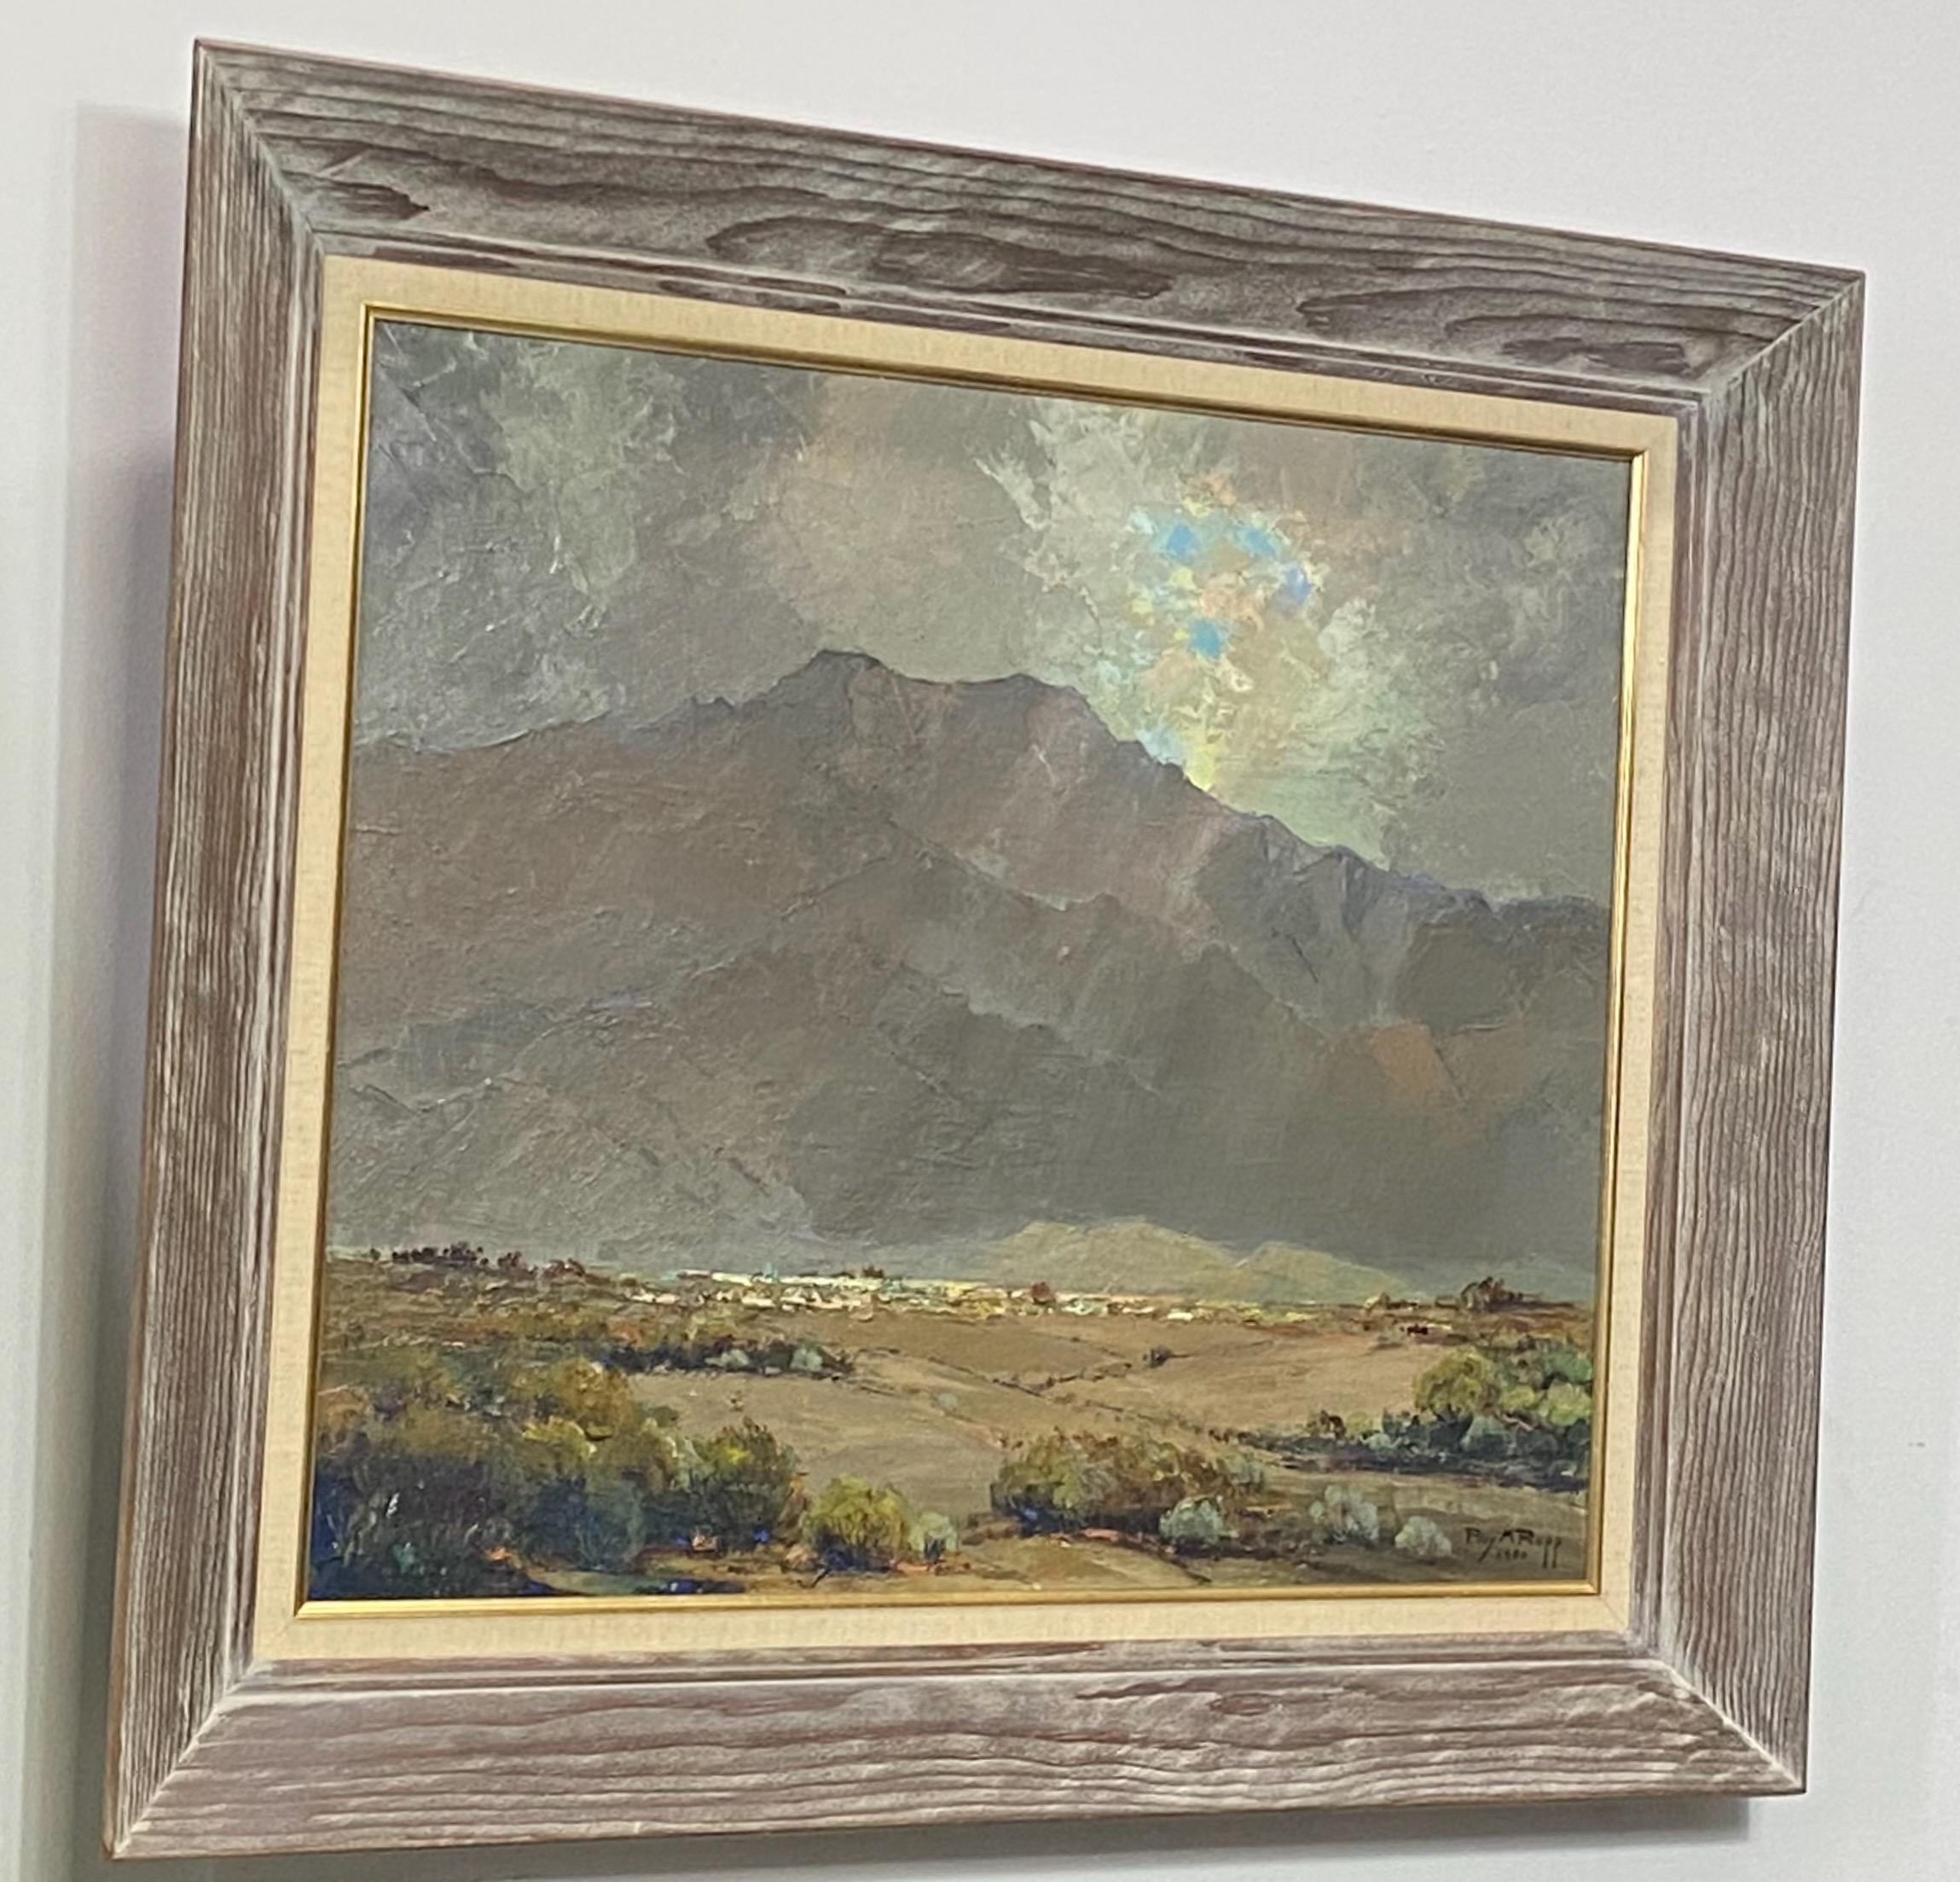 Palm Springs Mountain Dessert Landscape Painting by Roy Ropp Dated 1951 1